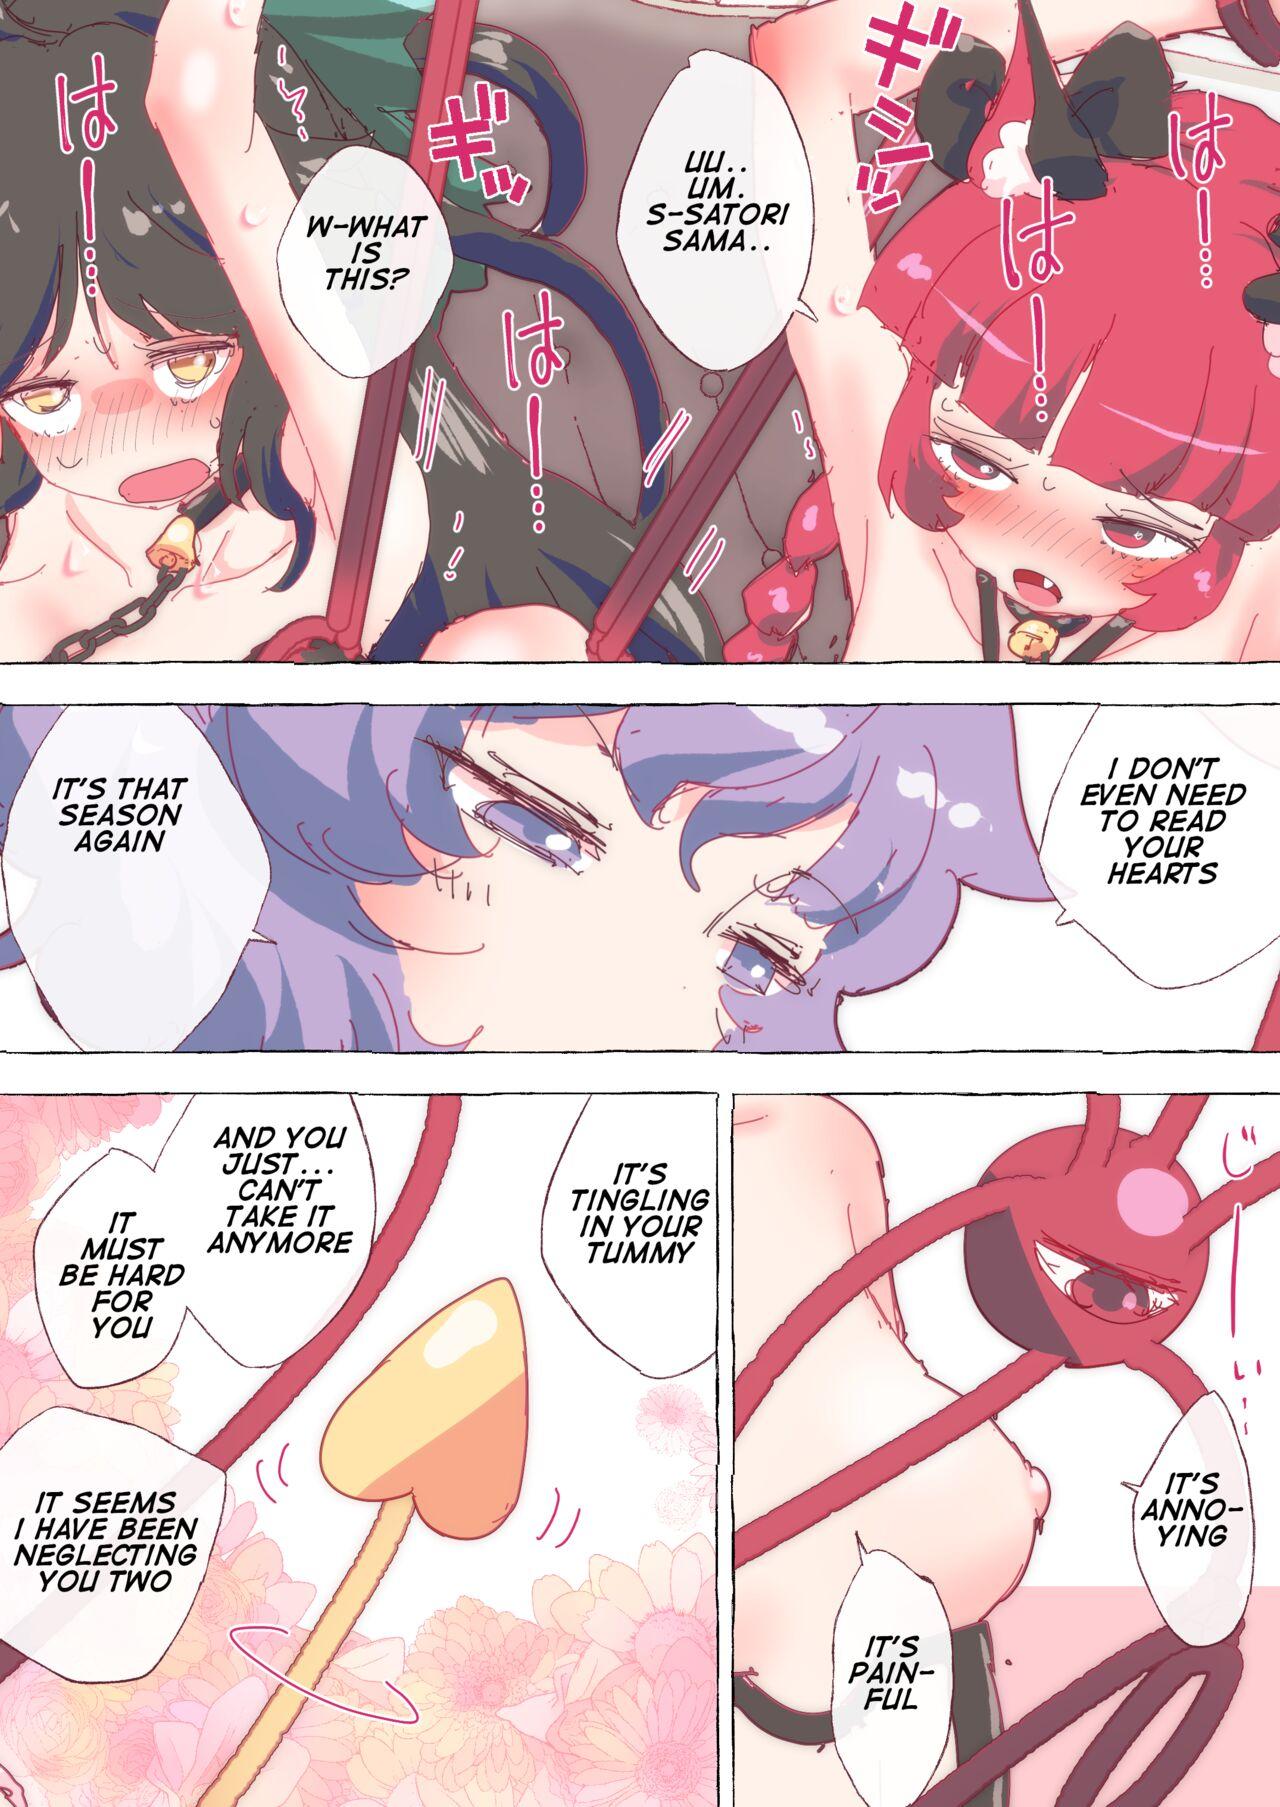 Prostitute Orin and Okuu can't hold back and cum all over the place while being trained by Satori-sama - Touhou project Audition - Page 1